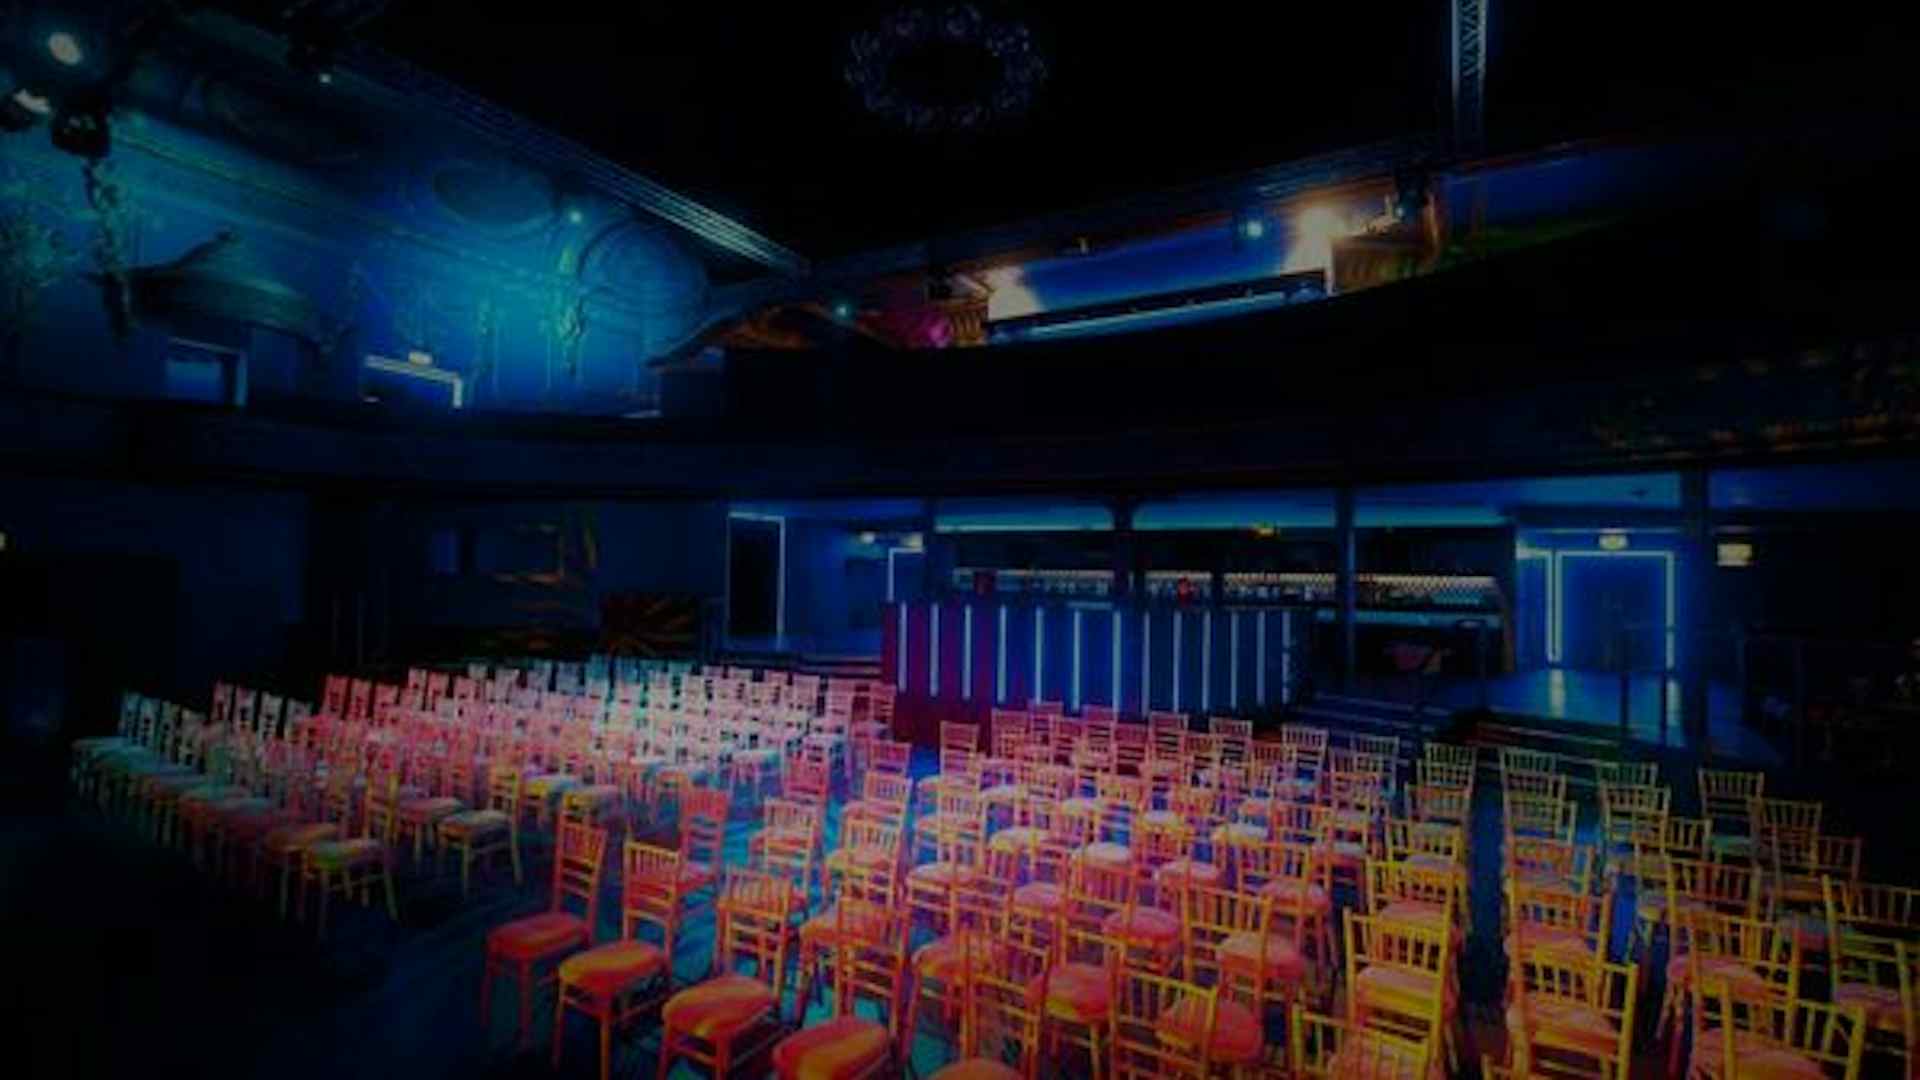 The Top 5 Quirky Conference Venues